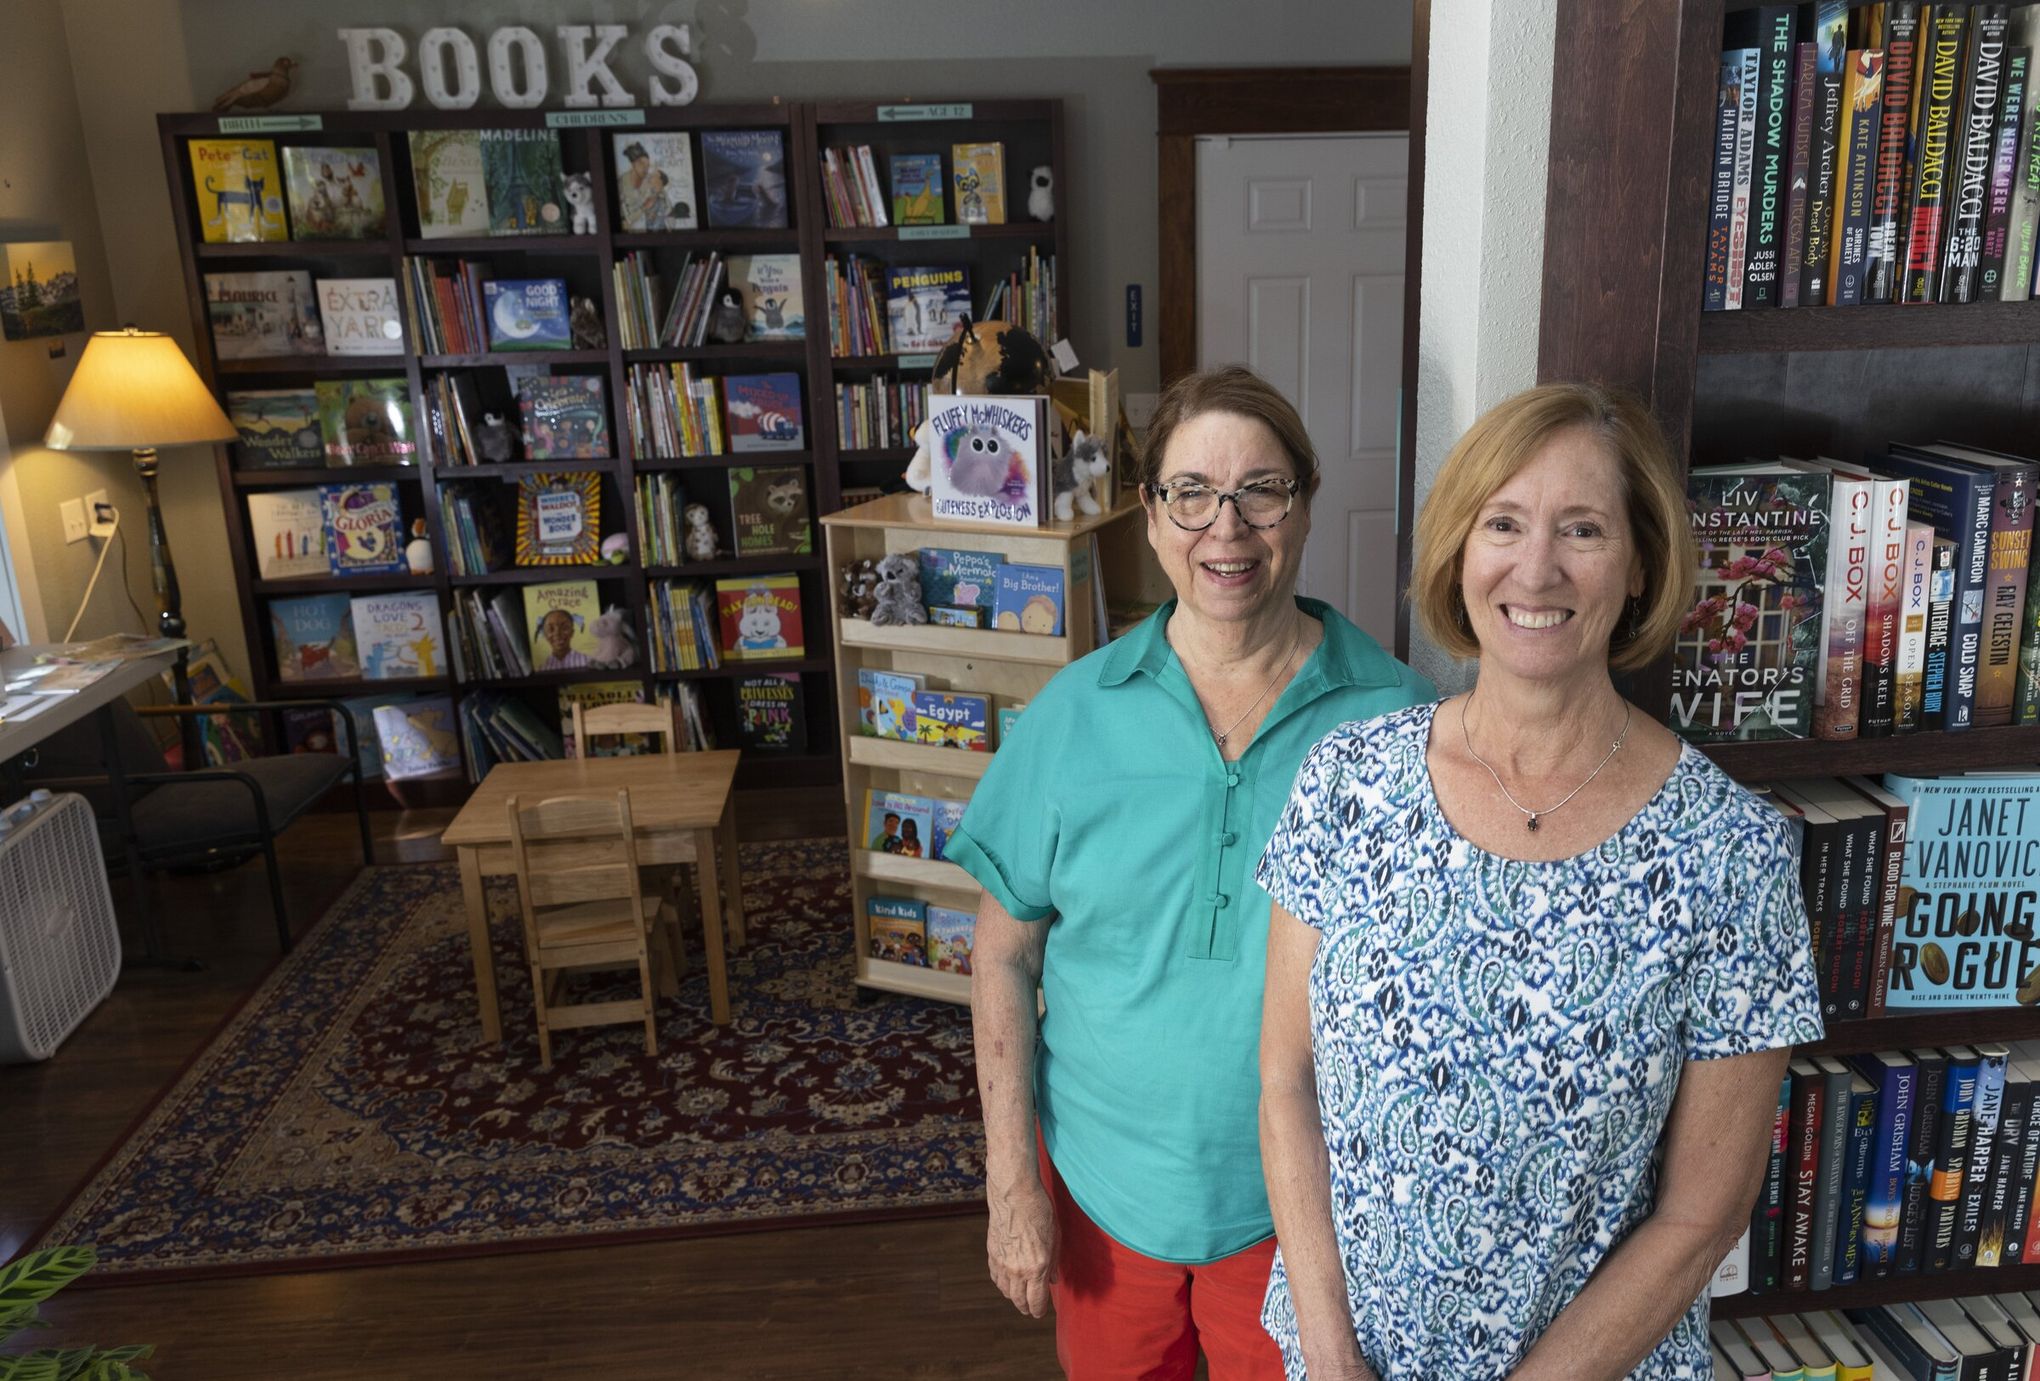 Book lover opening The Wanderlust Bookstore in Corinth, Business